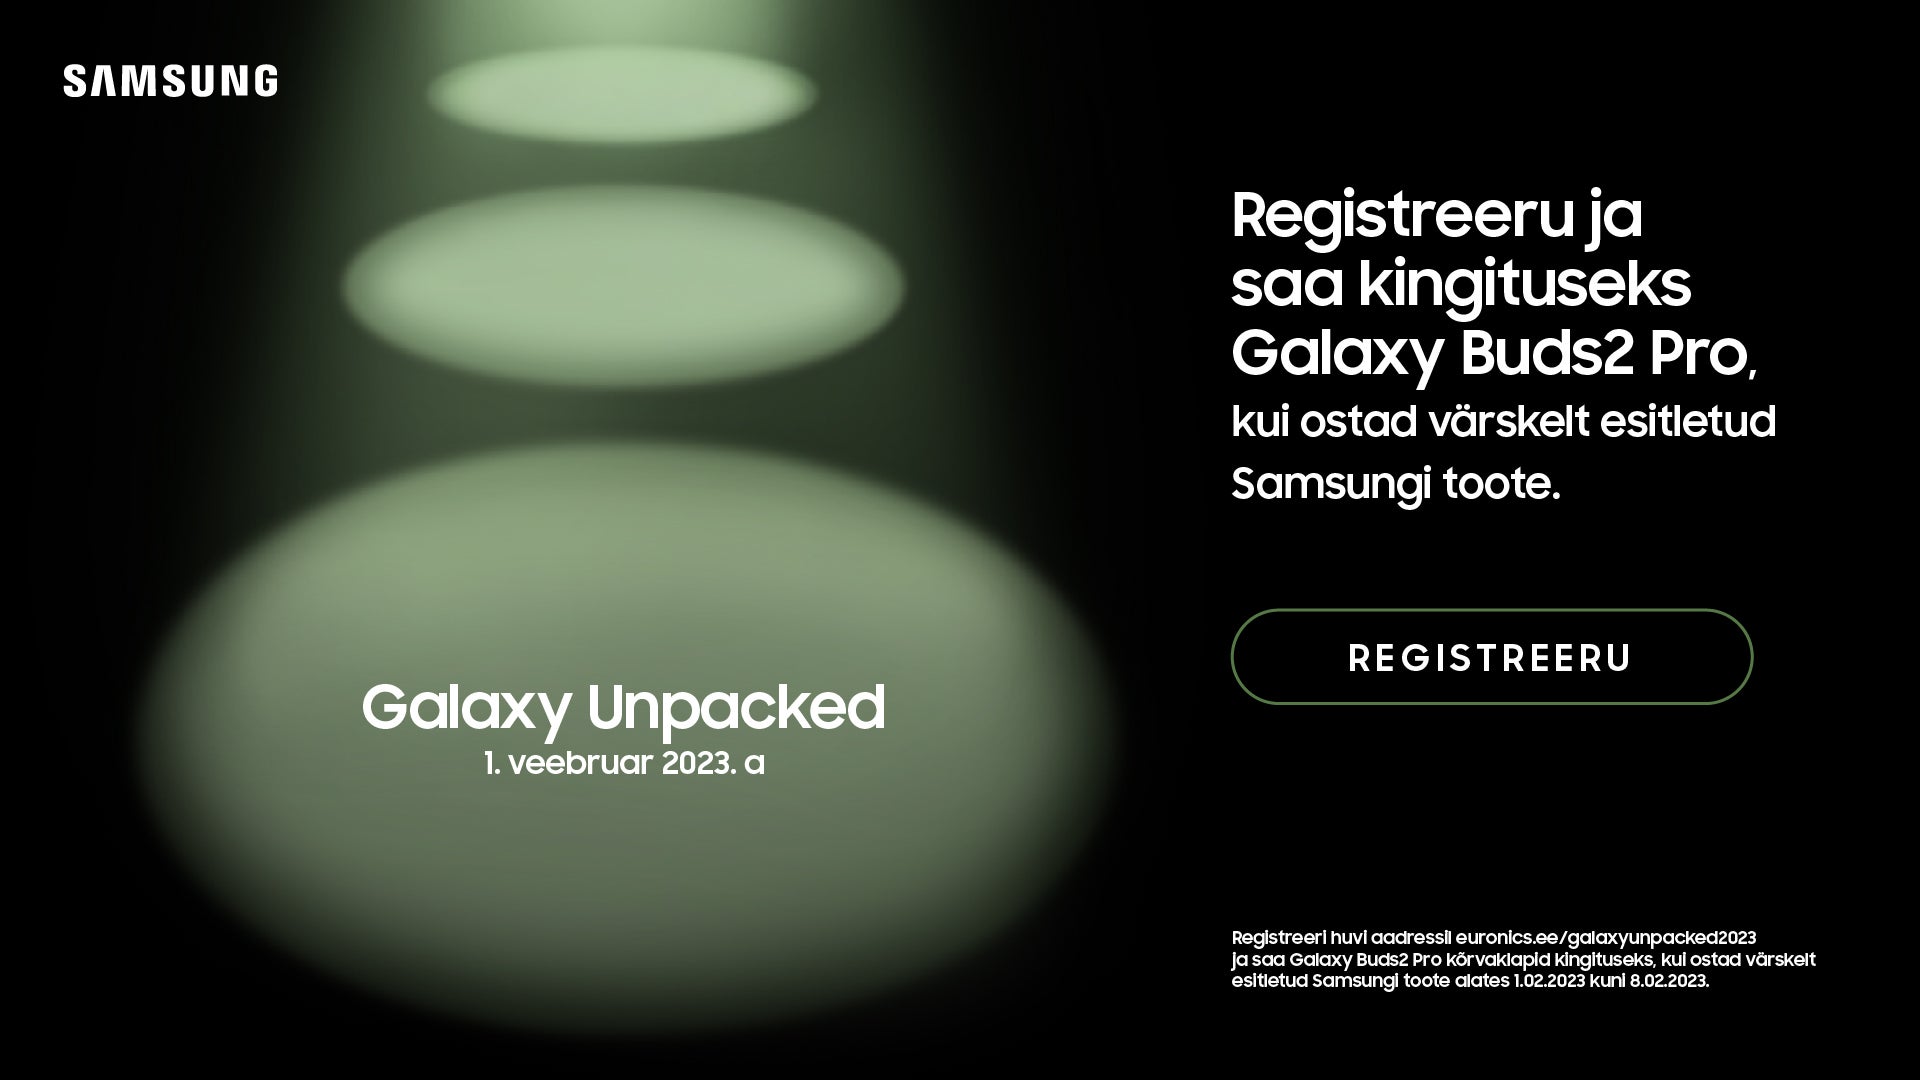 Samsung Estonia may have revealed the preorder gift for the Galaxy S23 series and its release date - Samsung inadvertently reveals Galaxy S23 release date and preorder gift